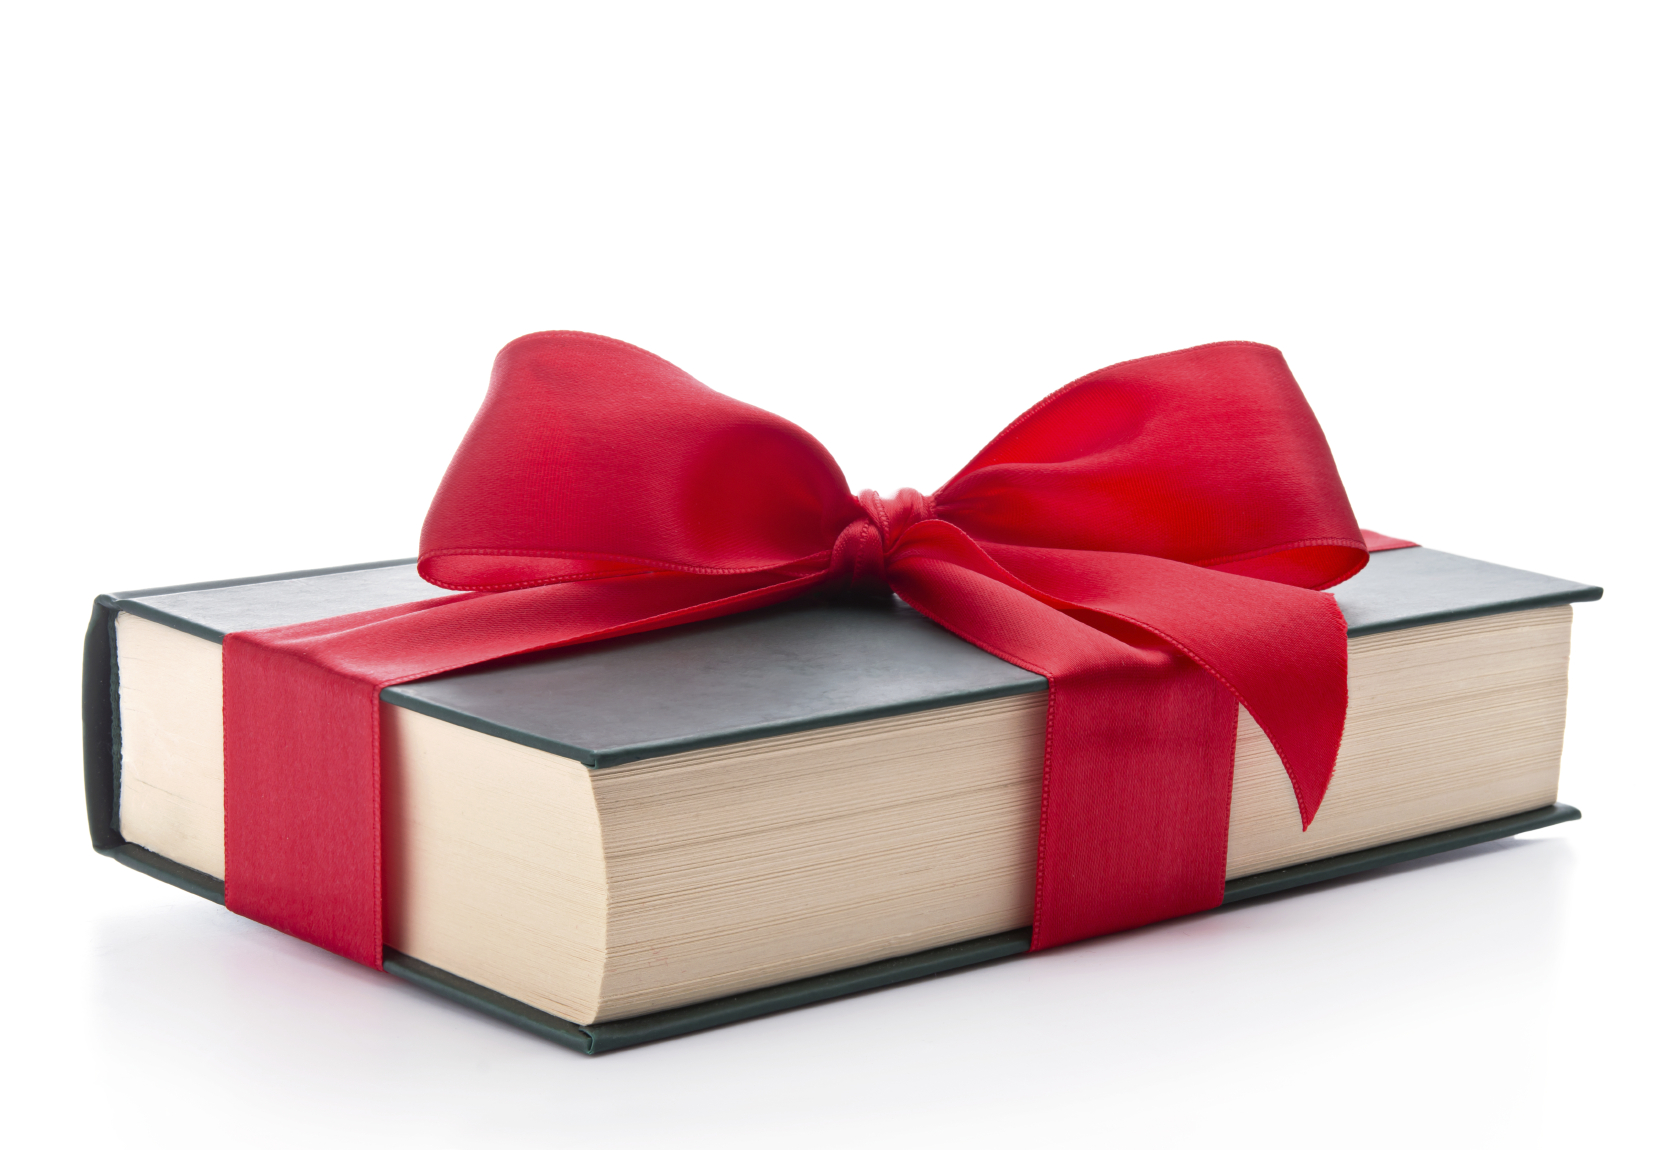 Book Gift Png Transparent Book Gift Png Images Pluspng The Best Porn